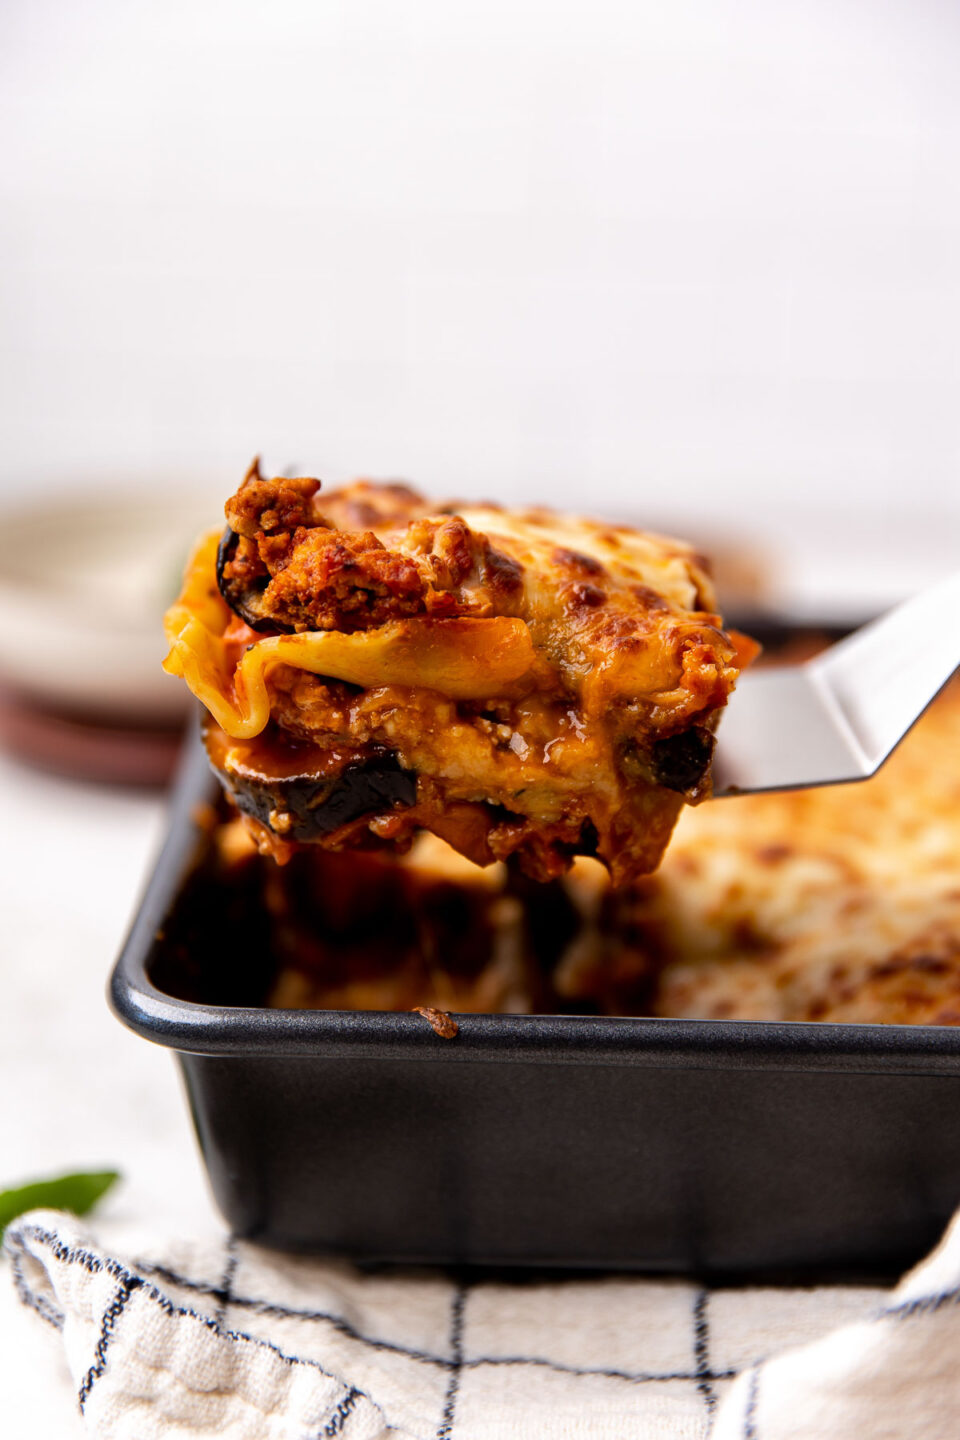 A single piece of eggplant lasagna is lifted out of a white baking dish with a metal spatula revealing the layers that make up the roasted eggplant lasagna and melty cheese.